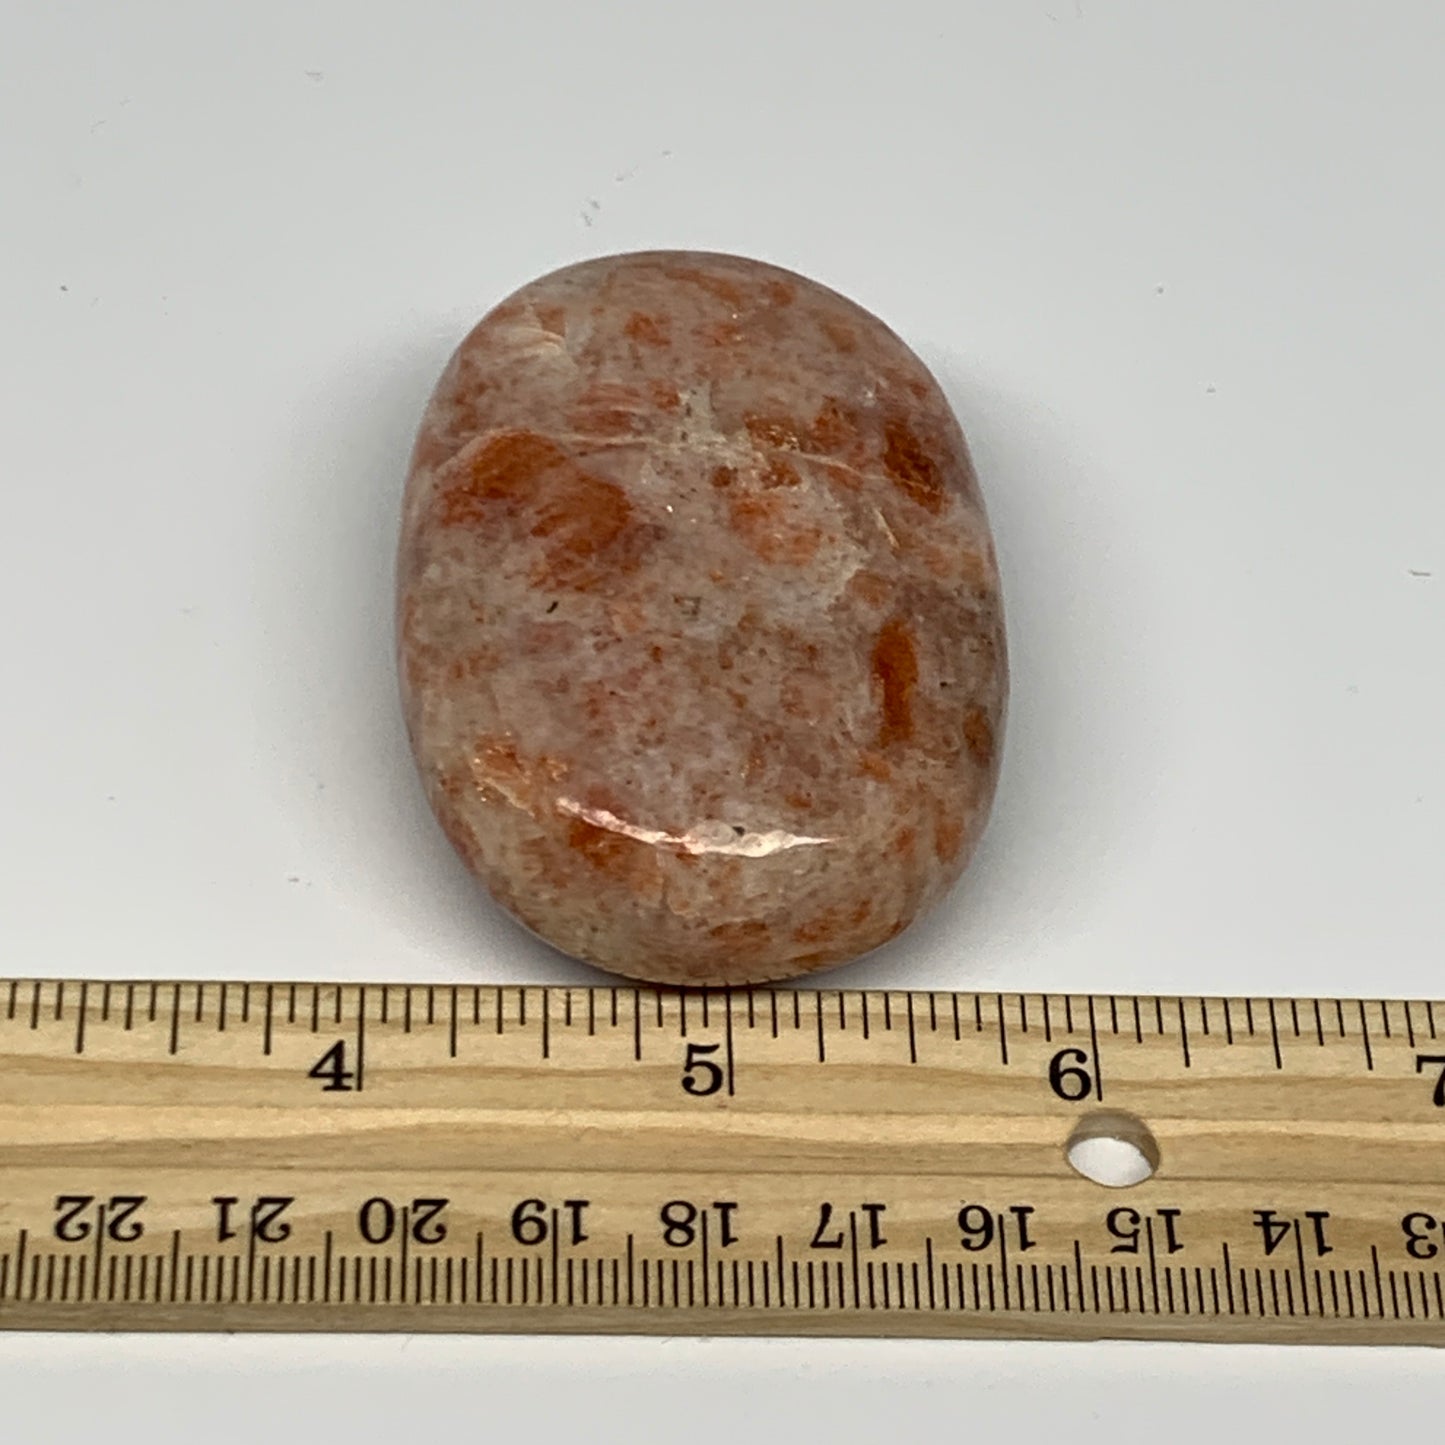 108.5g, 2.4"x1.7"x1", Natural Sunstone Palm-Stone Polished from India, B27061